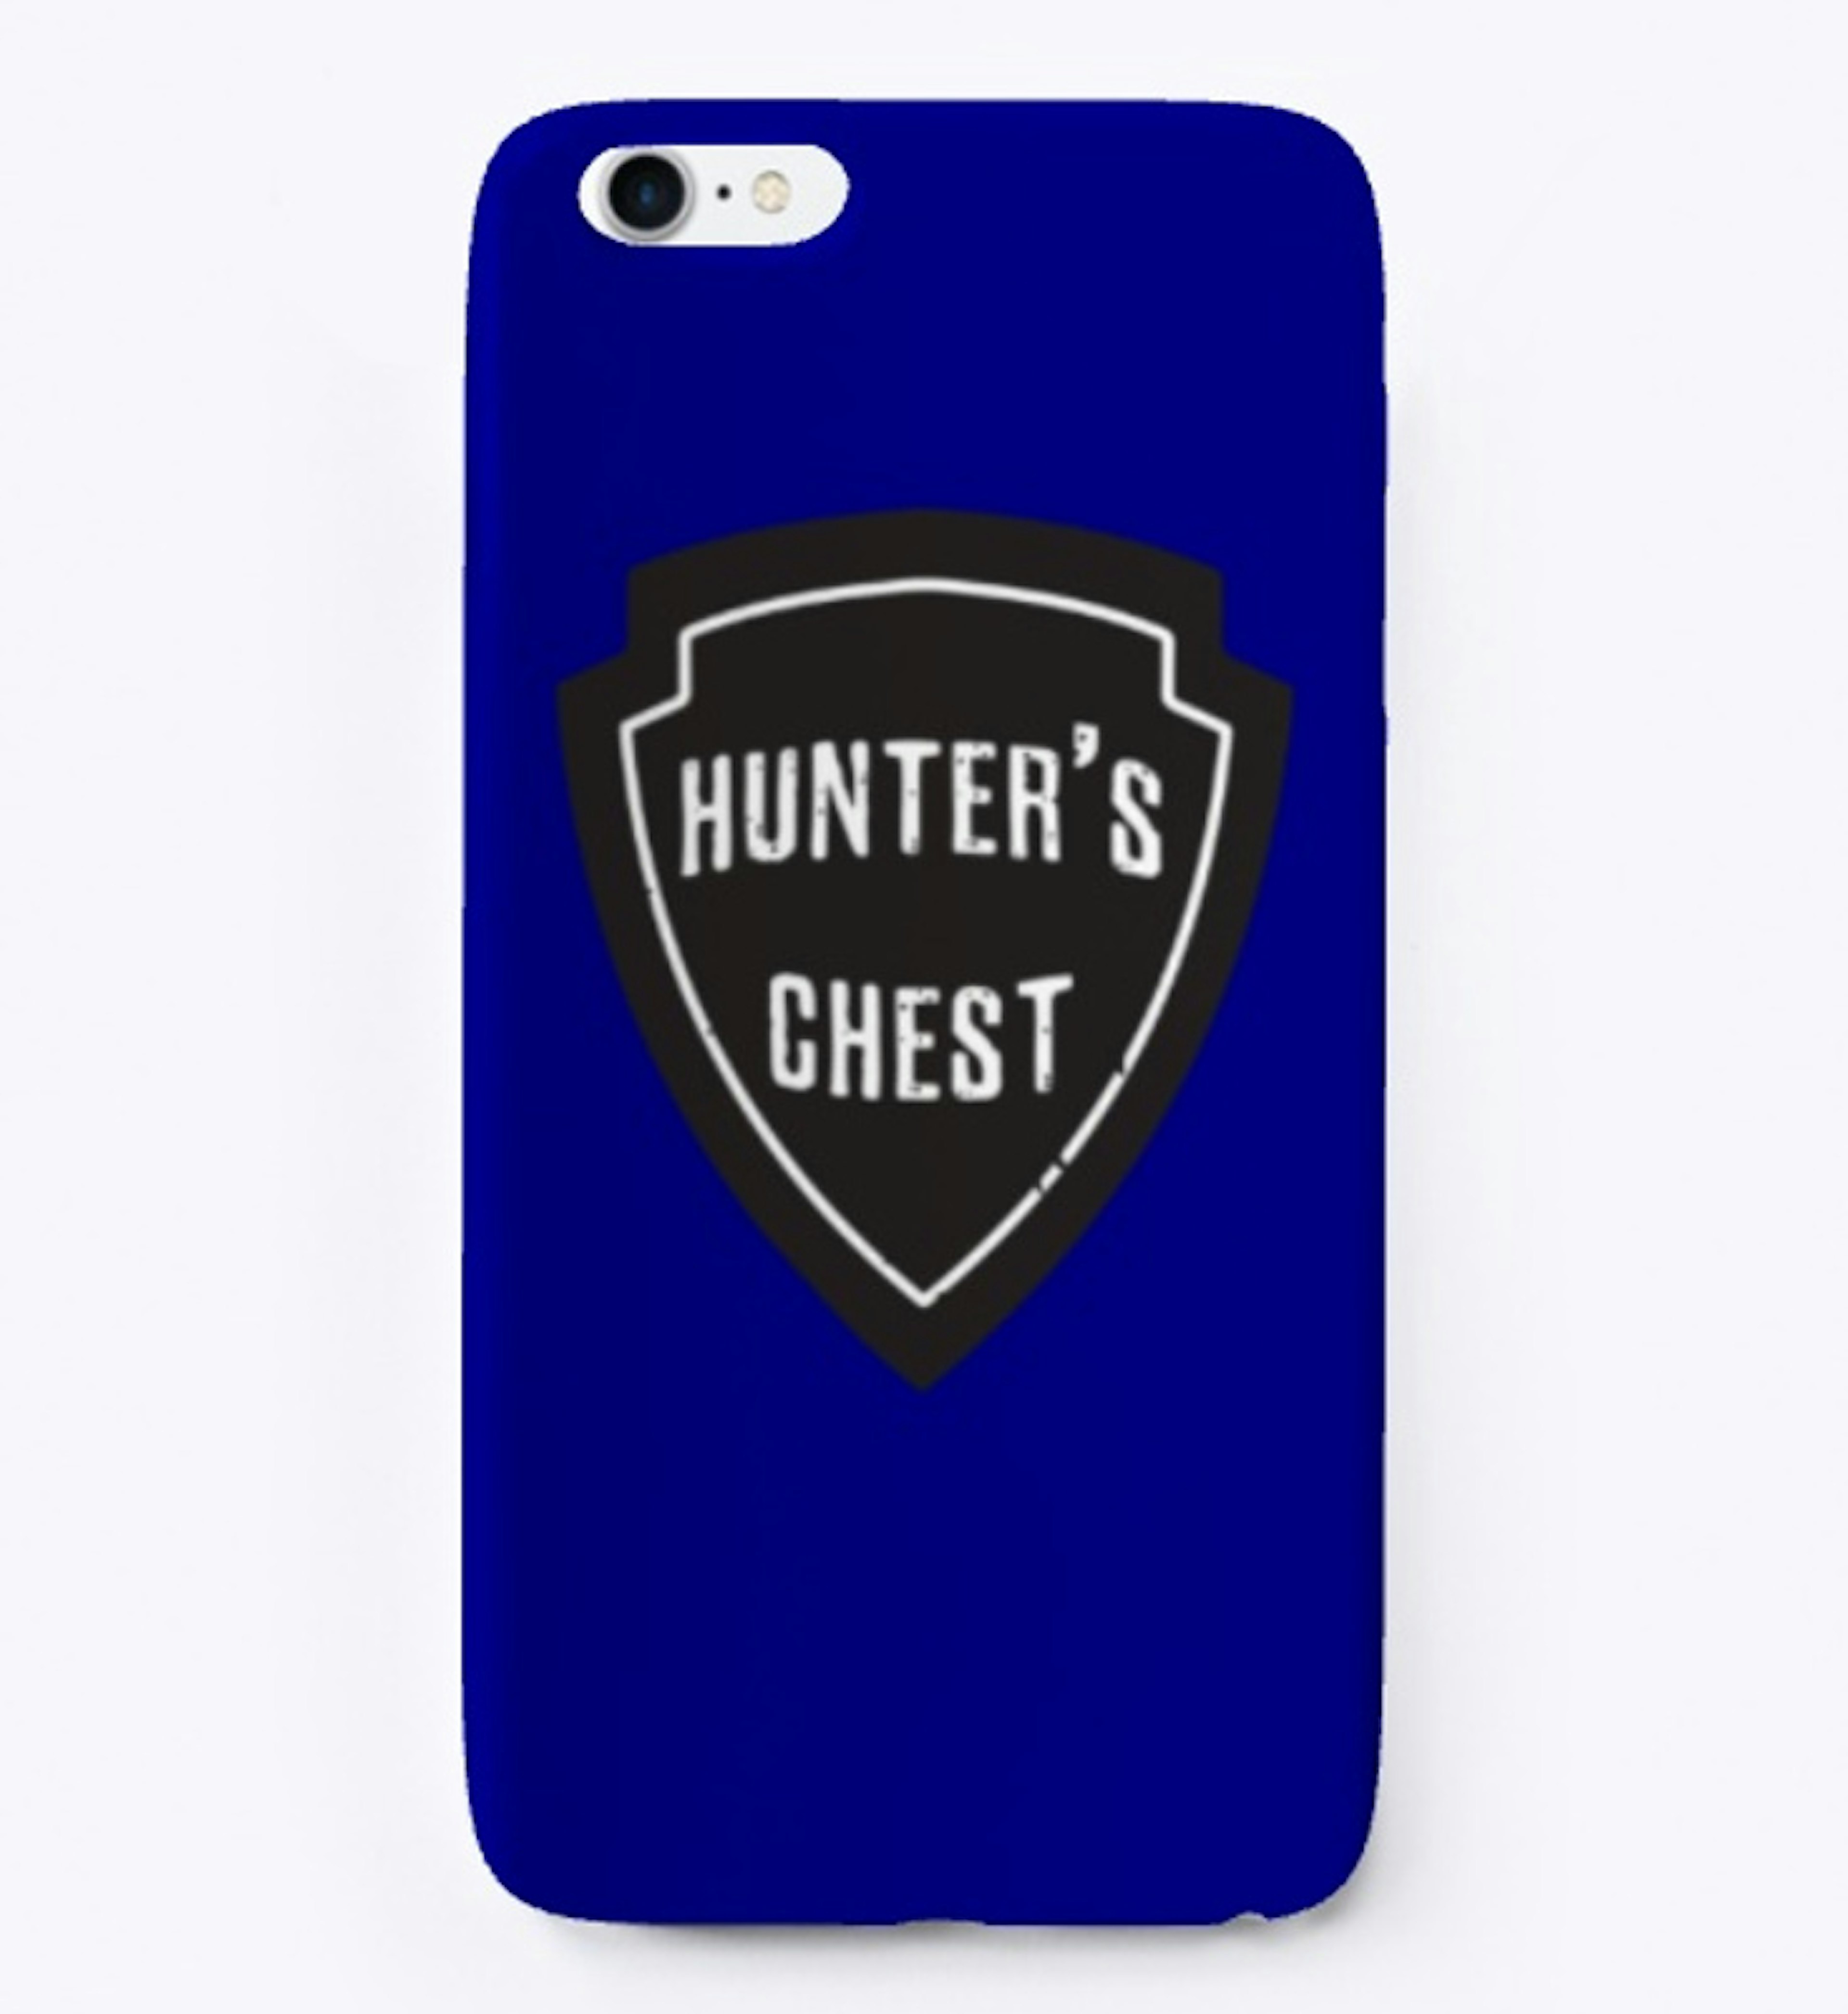 Hunter's Chest iPhone Case